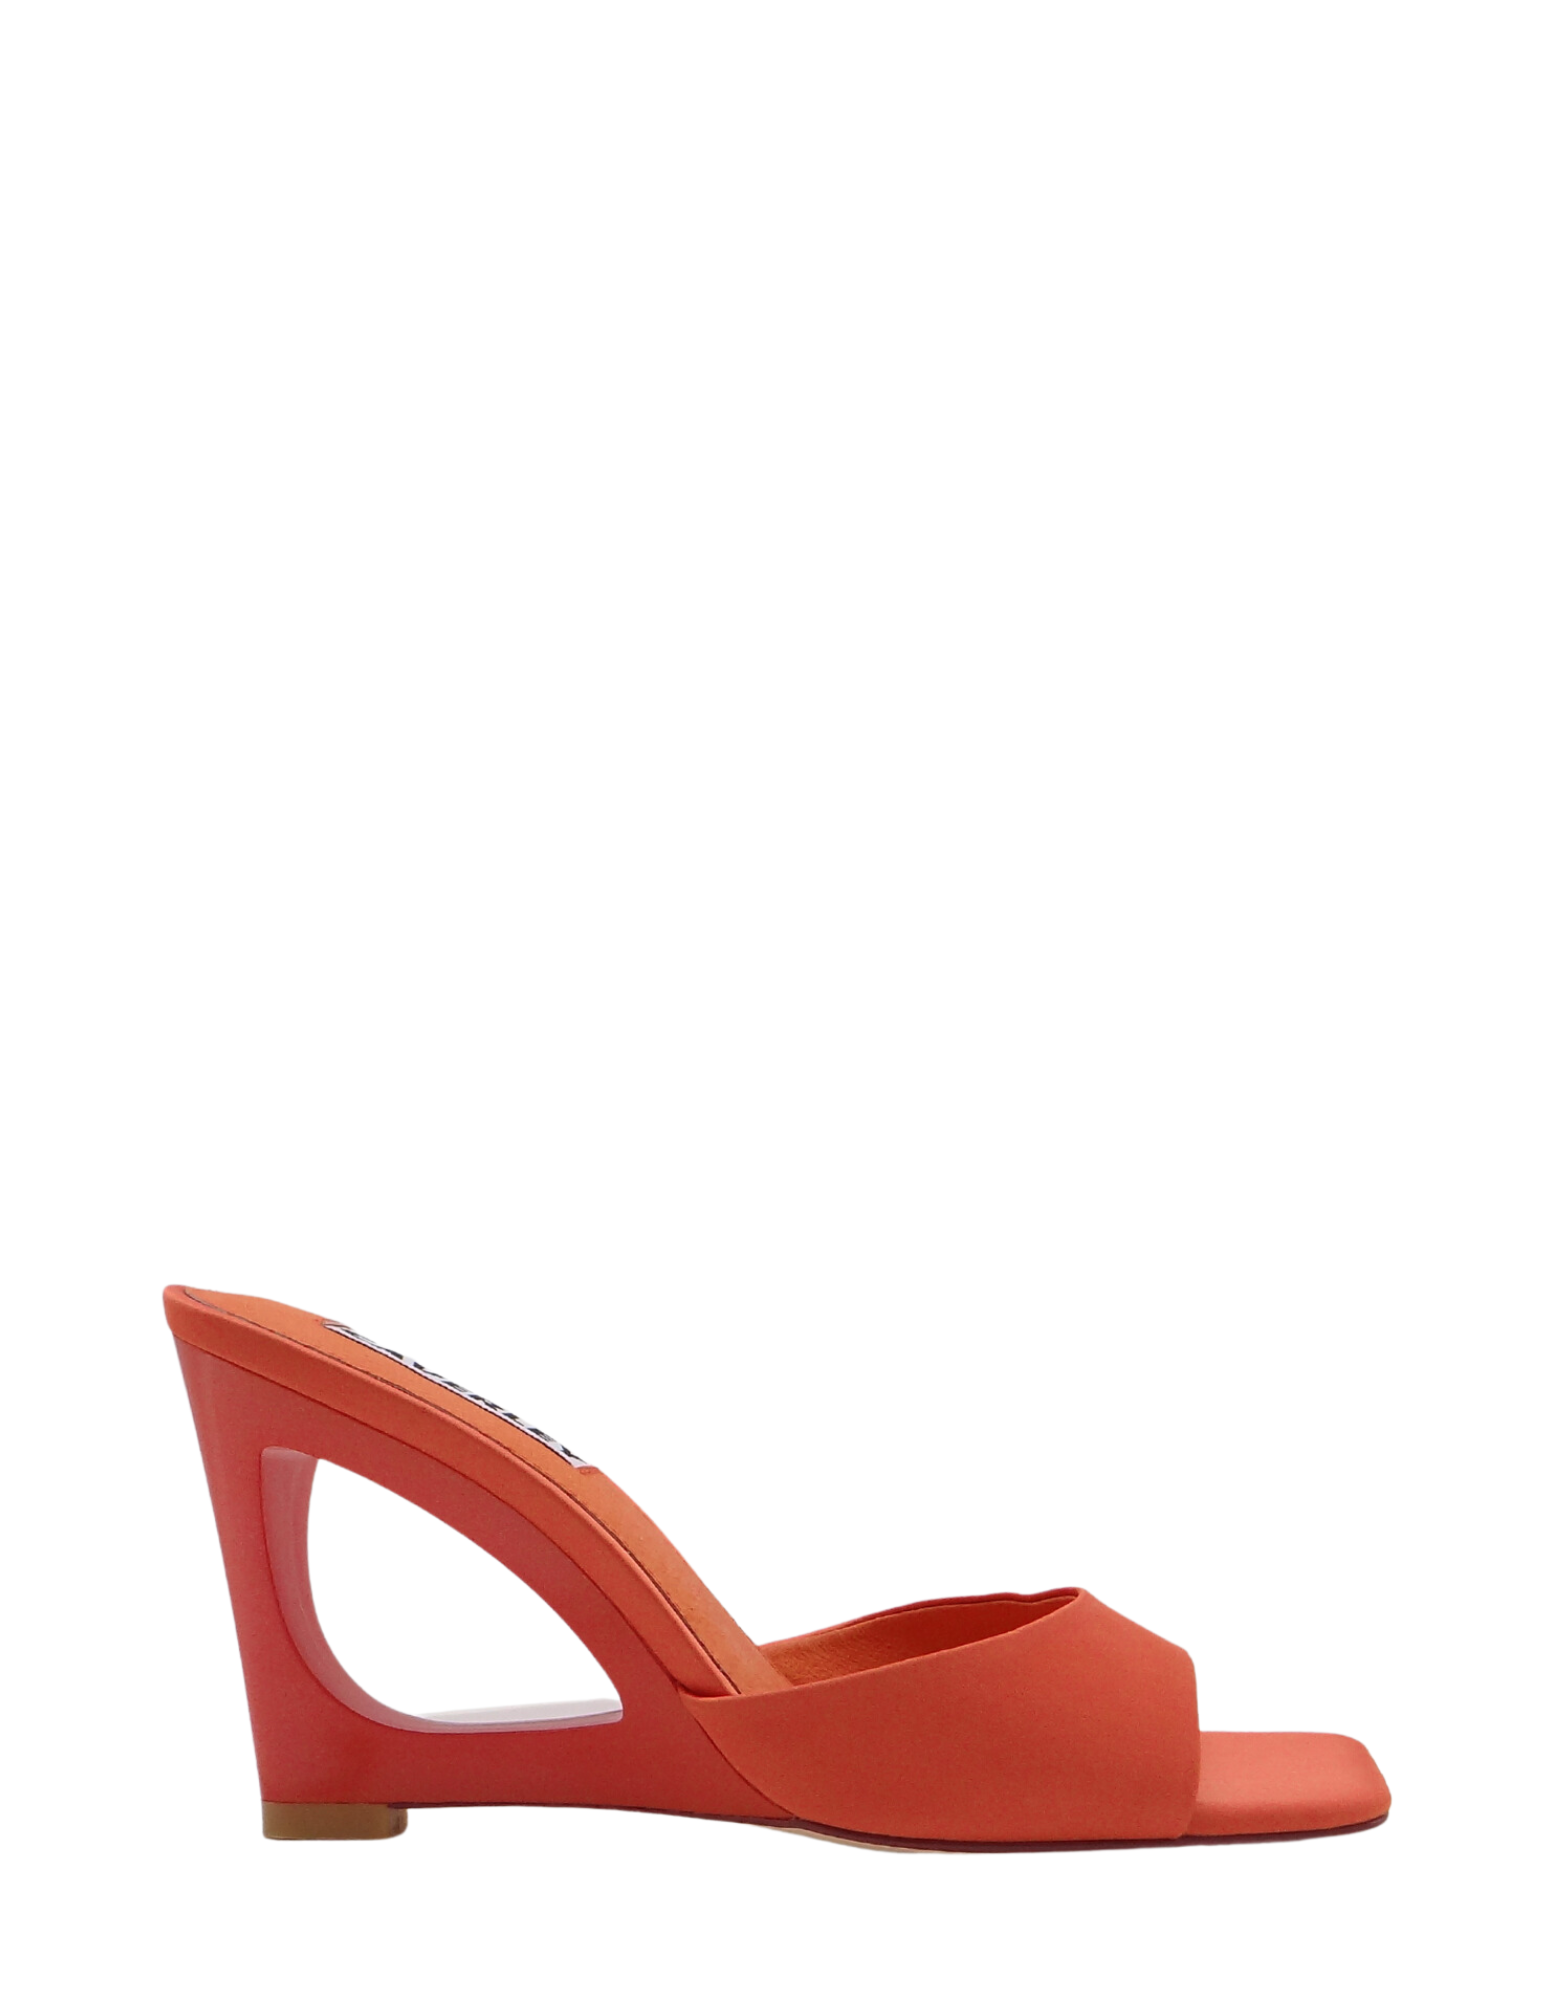 Parallel Culture Shoes and Fashion Online WEDGES CAVERLY OZI WEDGE CORAL SATIN